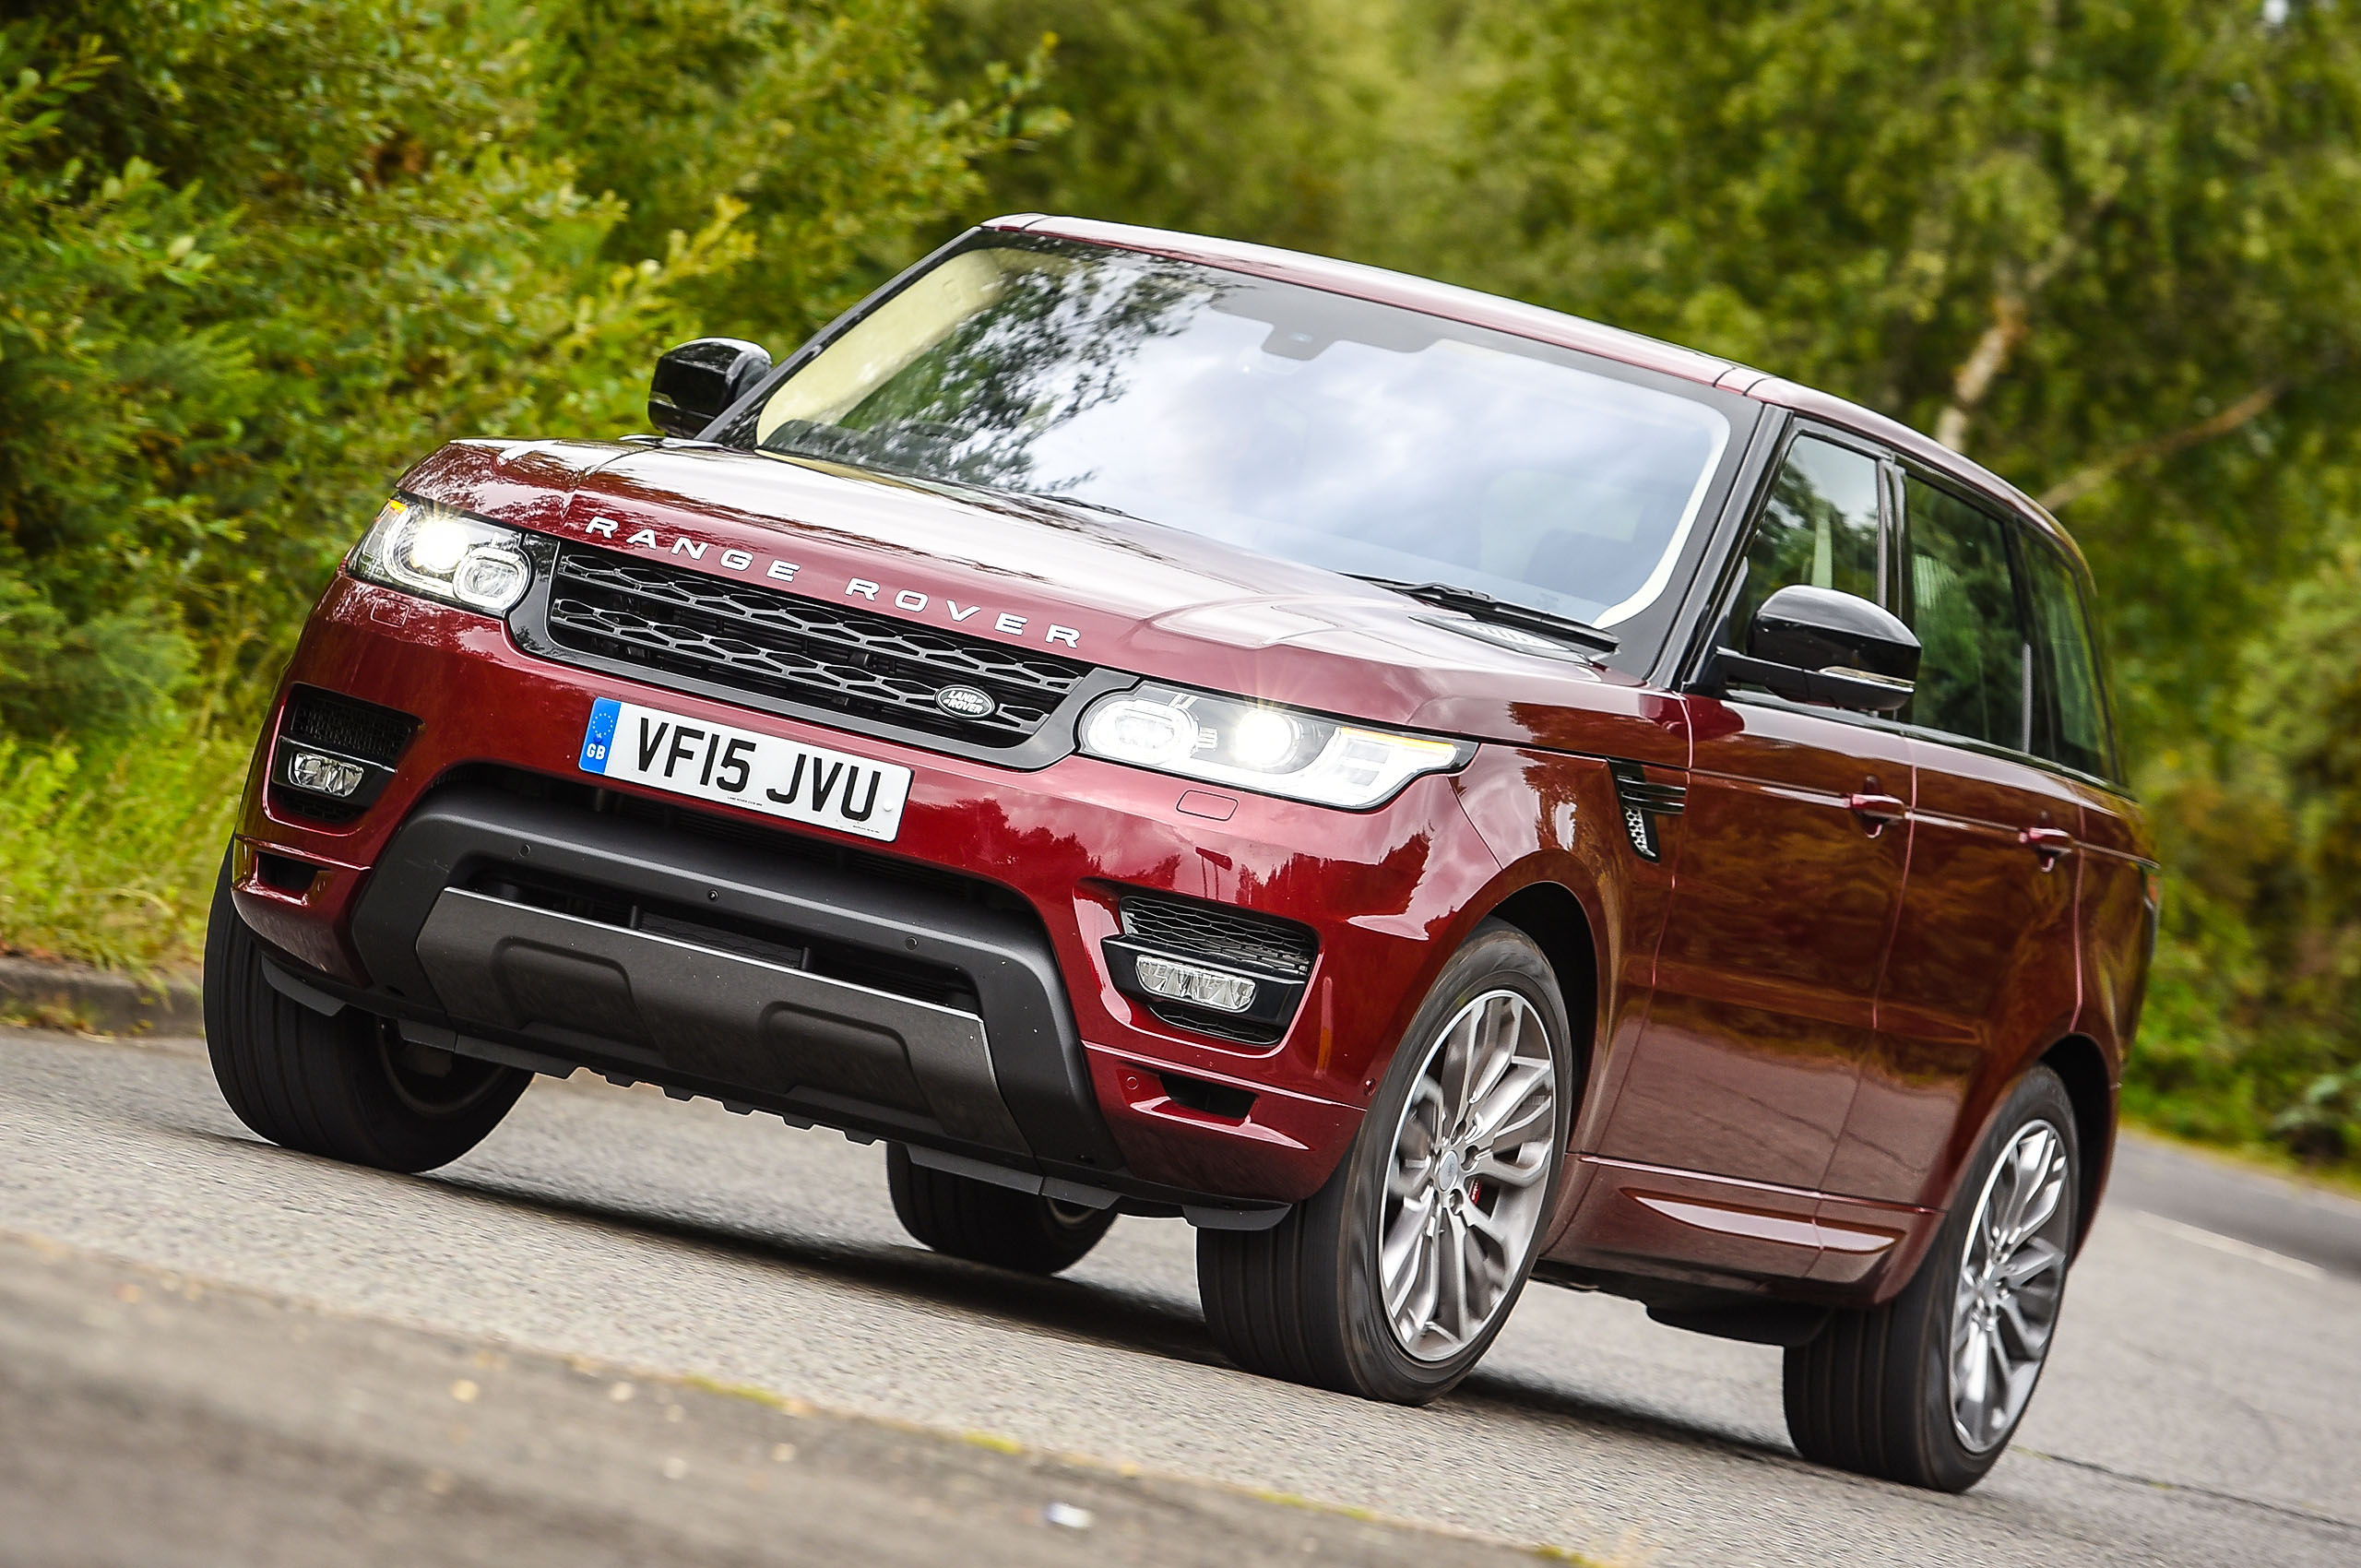 2016 Range Rover Sport 3.0 Autobiography Dynamic first drive | Autocar